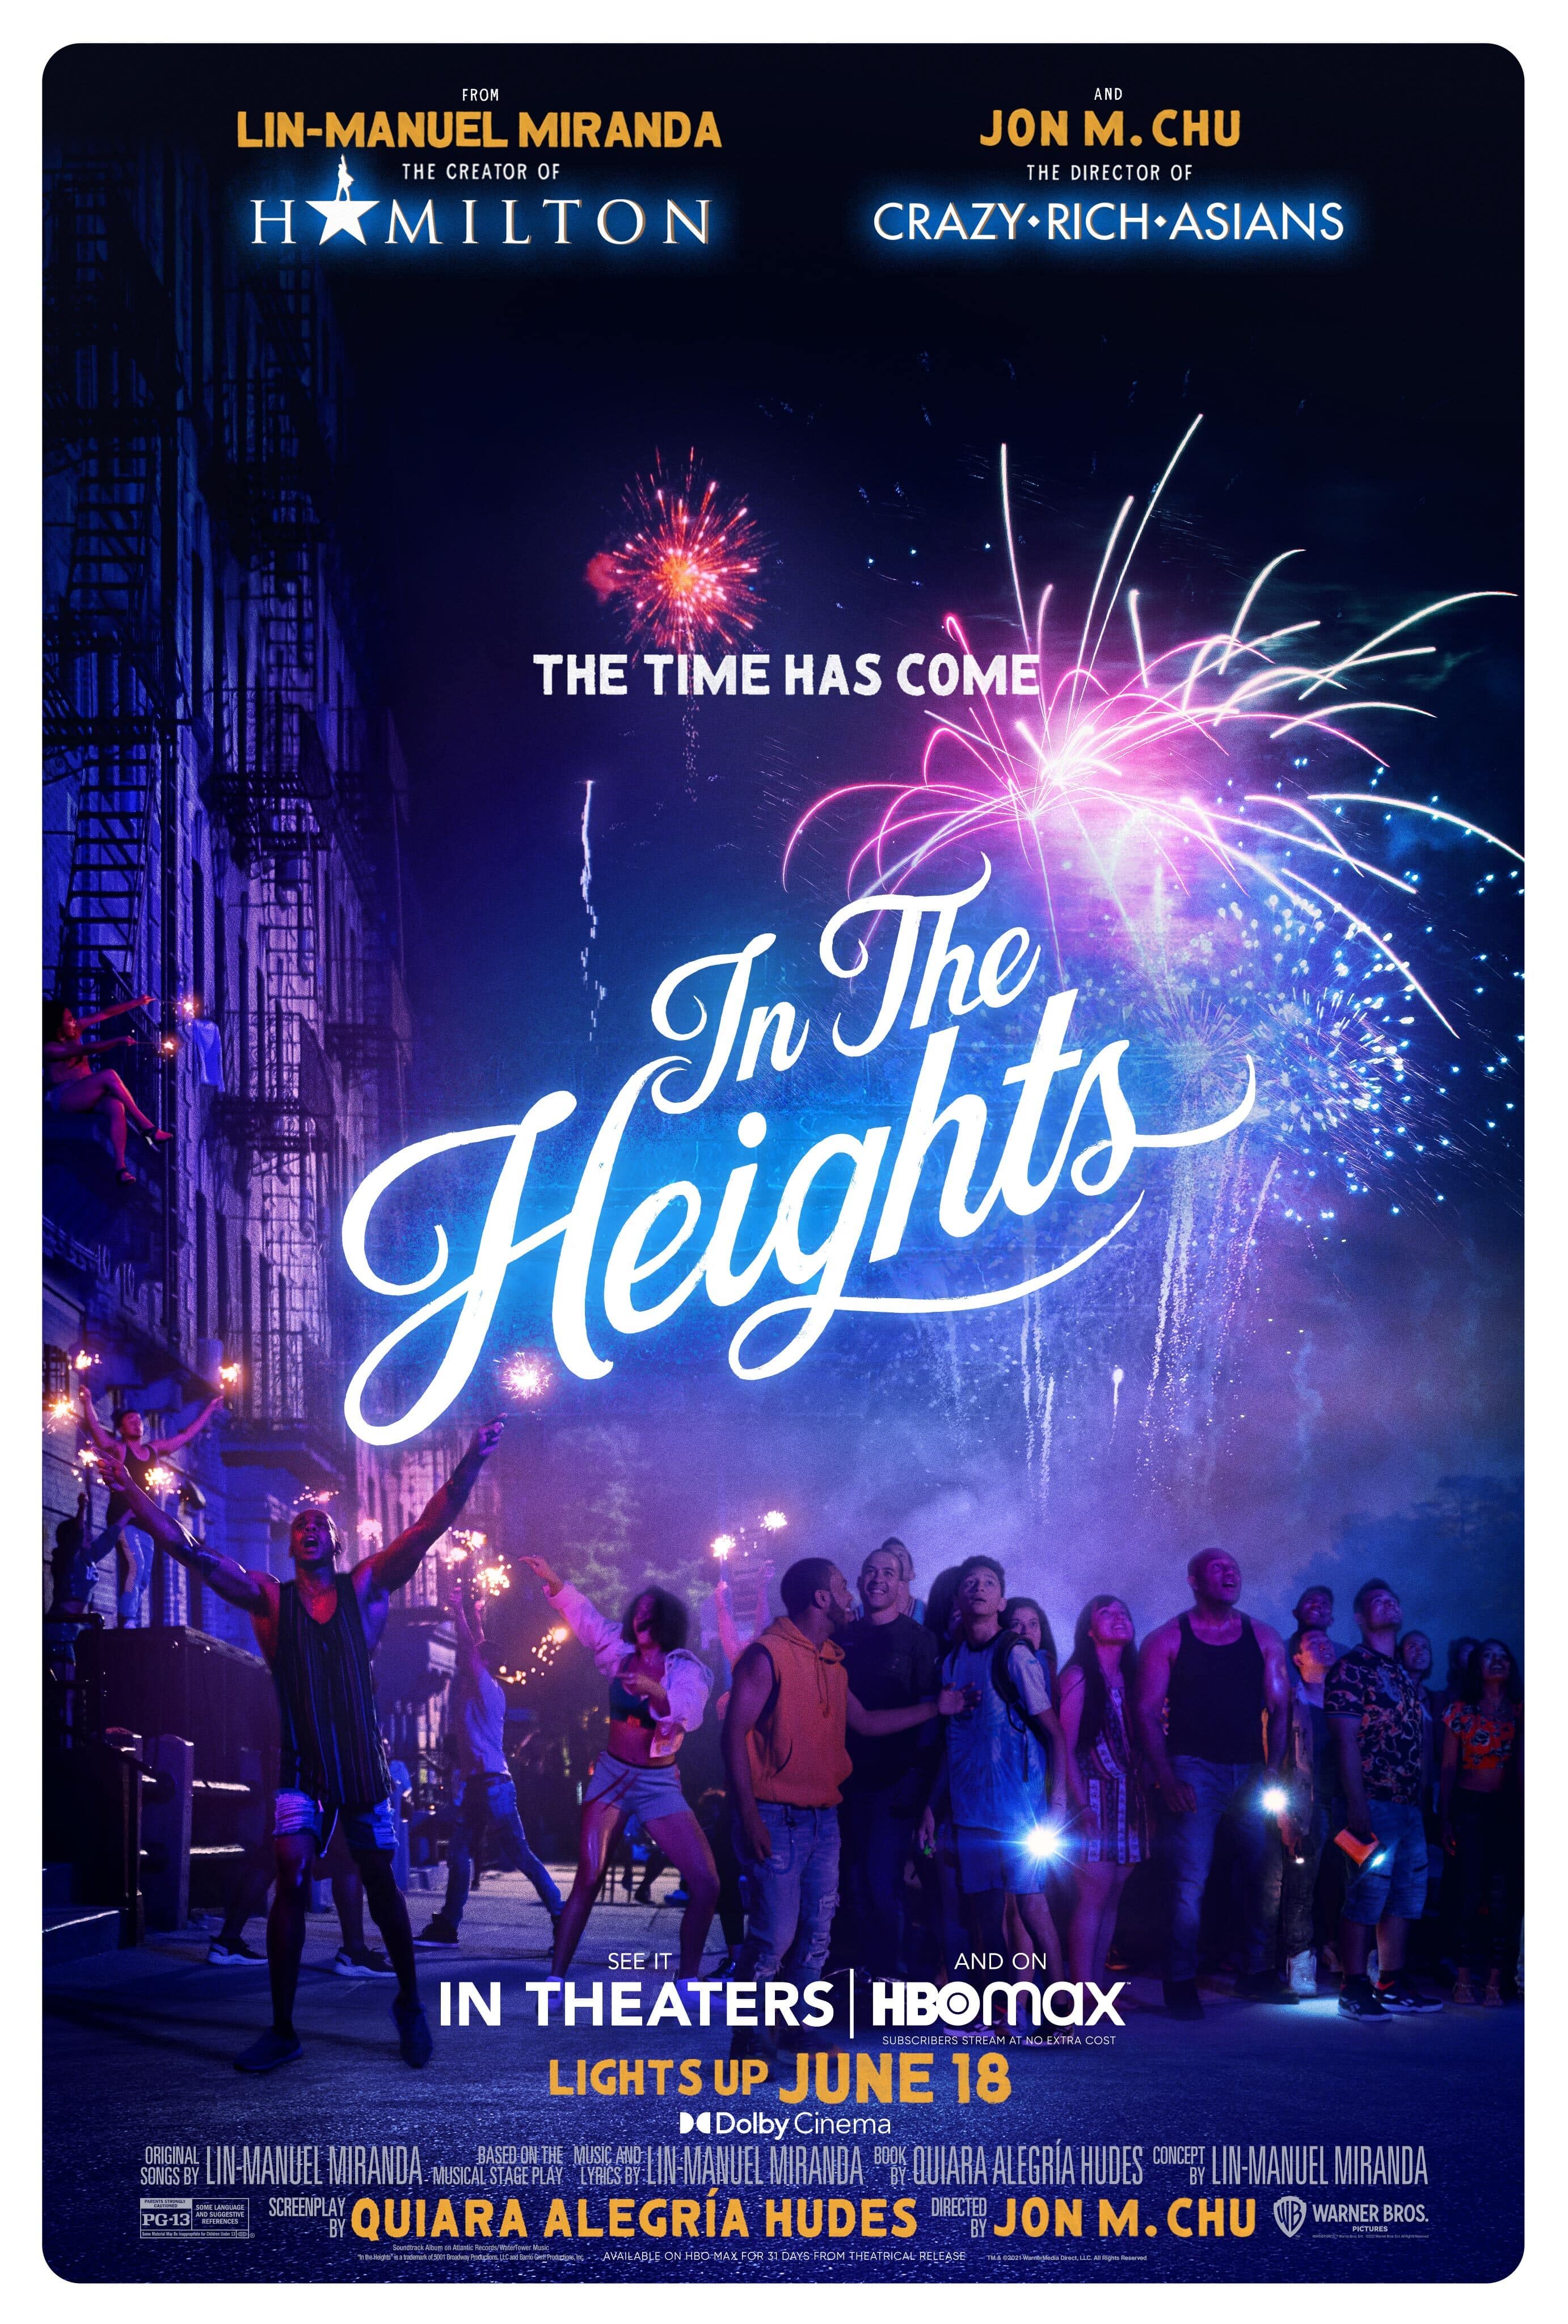 New In the Heights movie poster of people celebrating in the street with fireworks